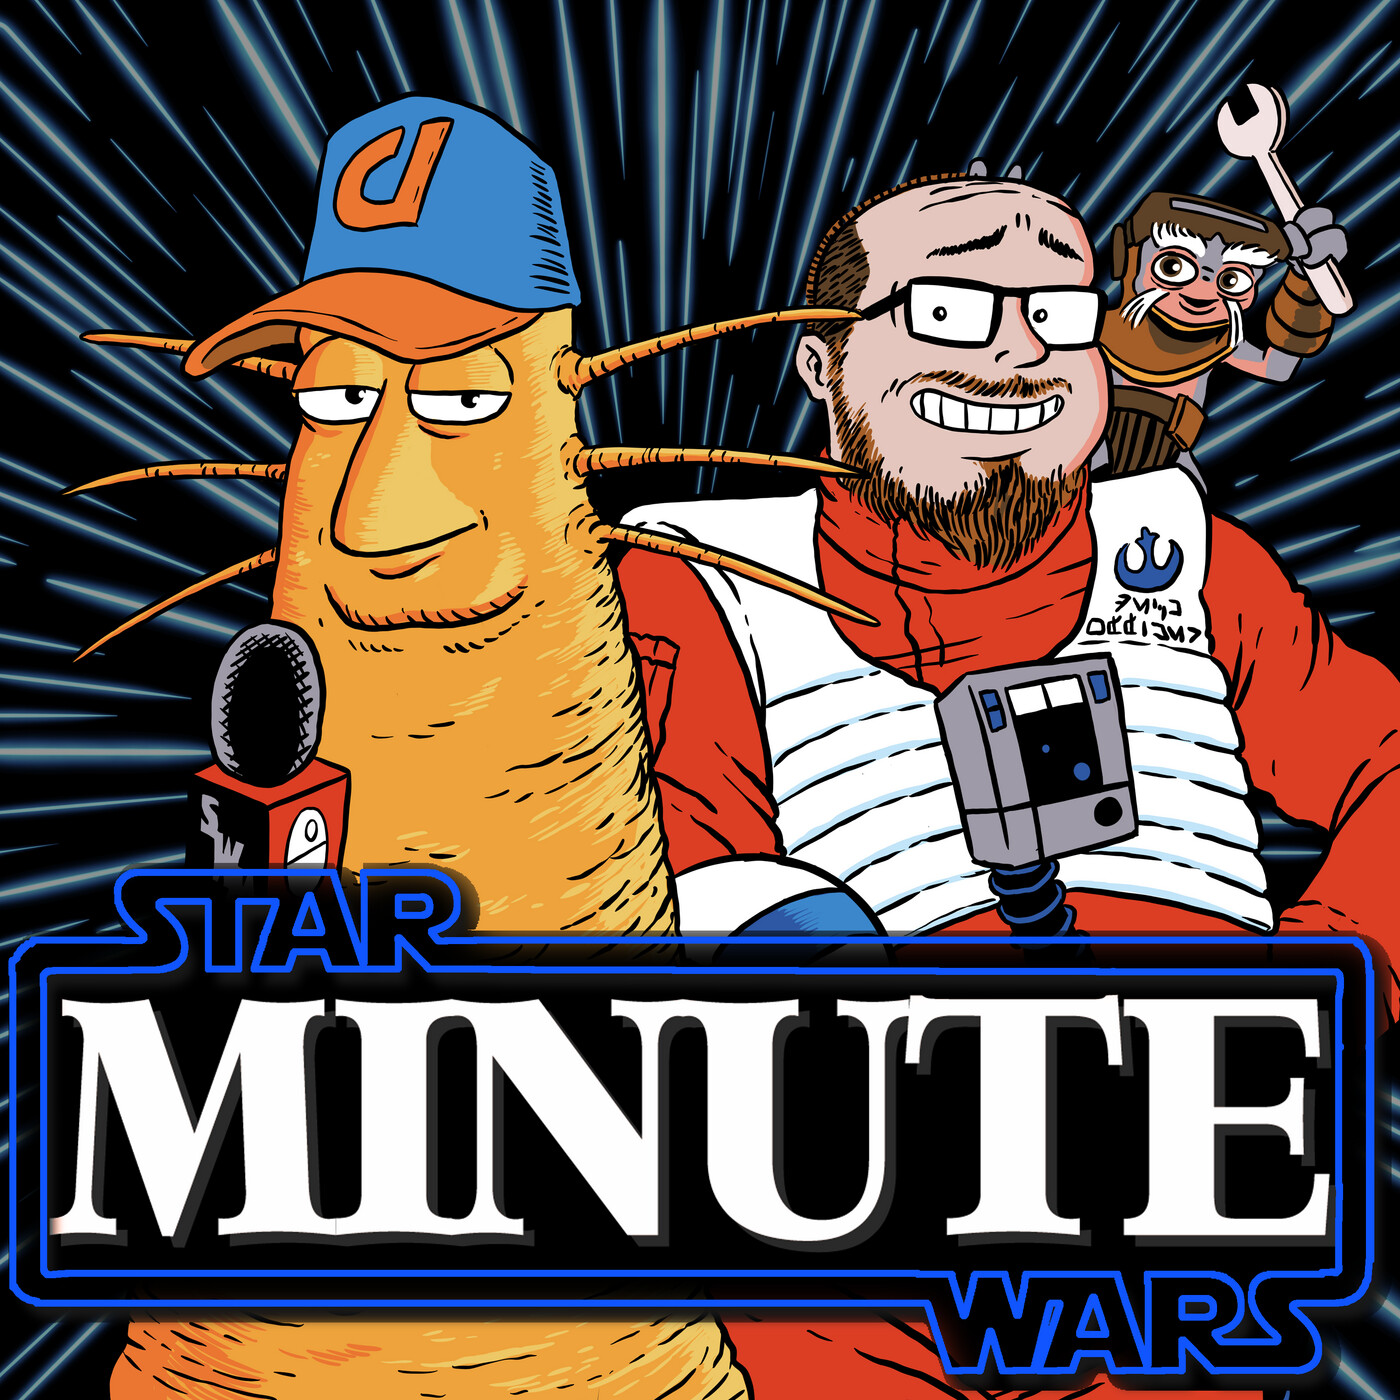 Star Wars Music Minute – Podcast – Podtail